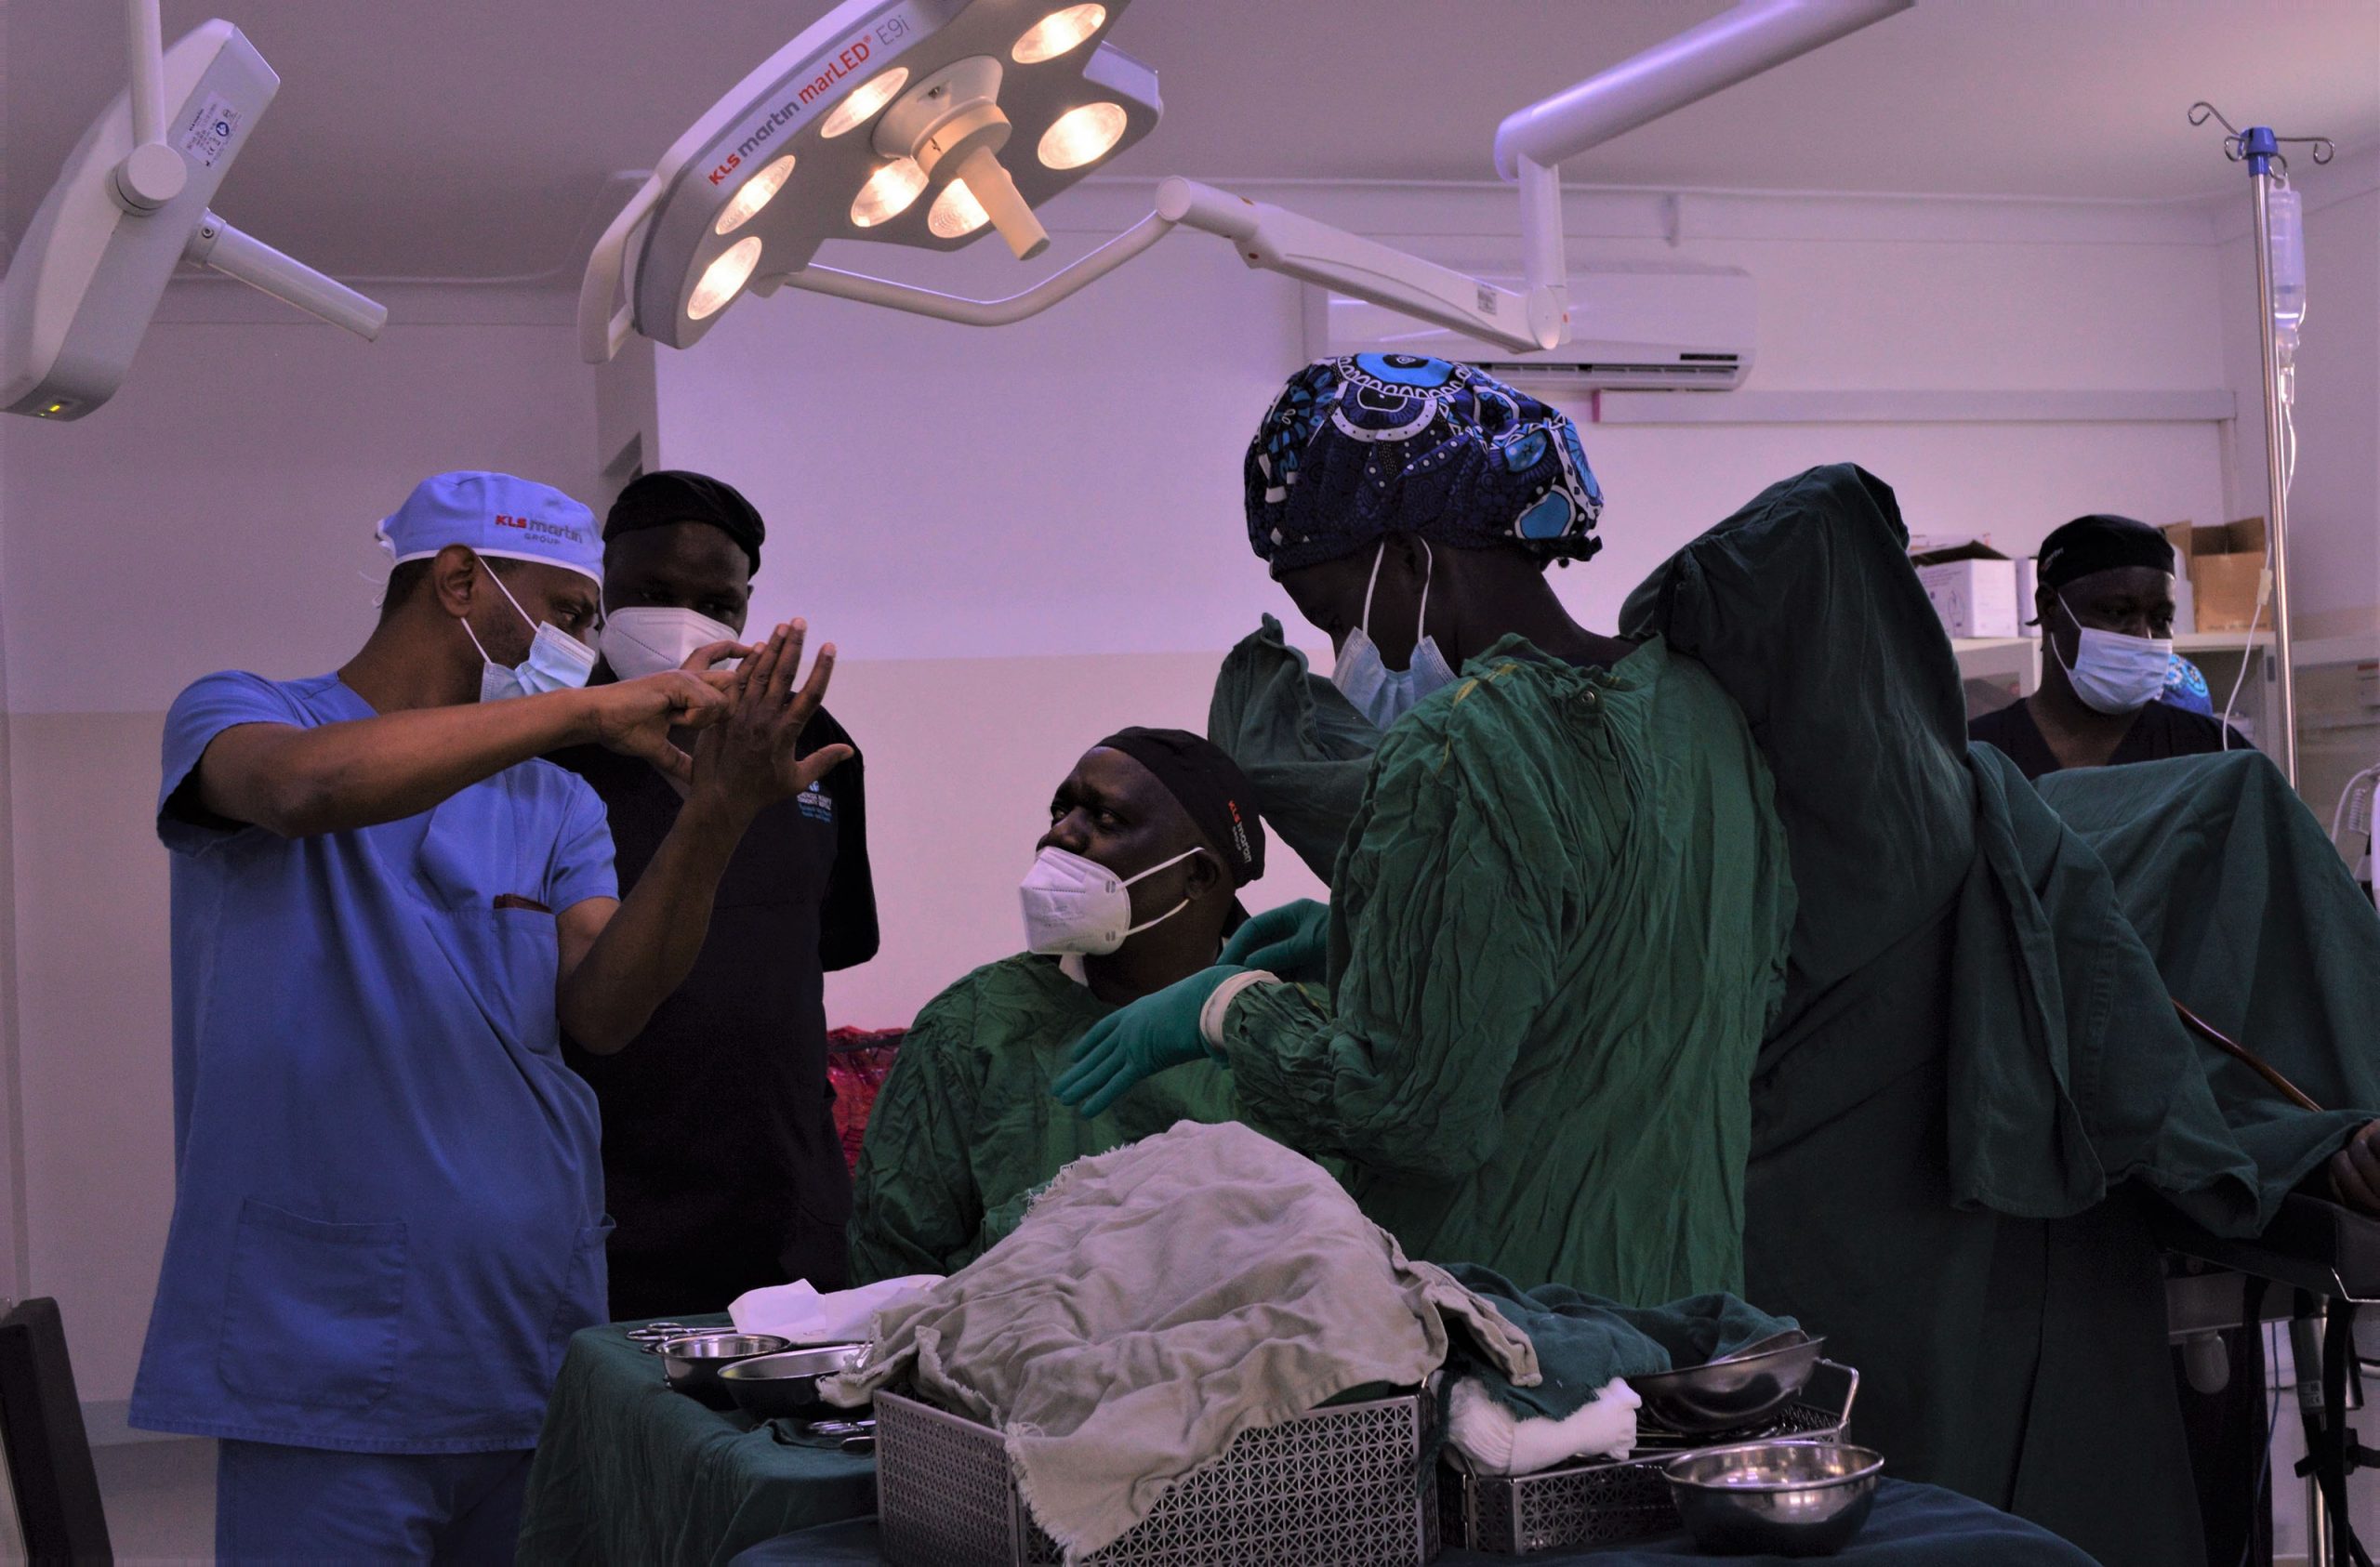 Dr. Fekade Ayenachew (Left), the lead trainer shares techniques with other surgeons in theatre during a surgery in theatre